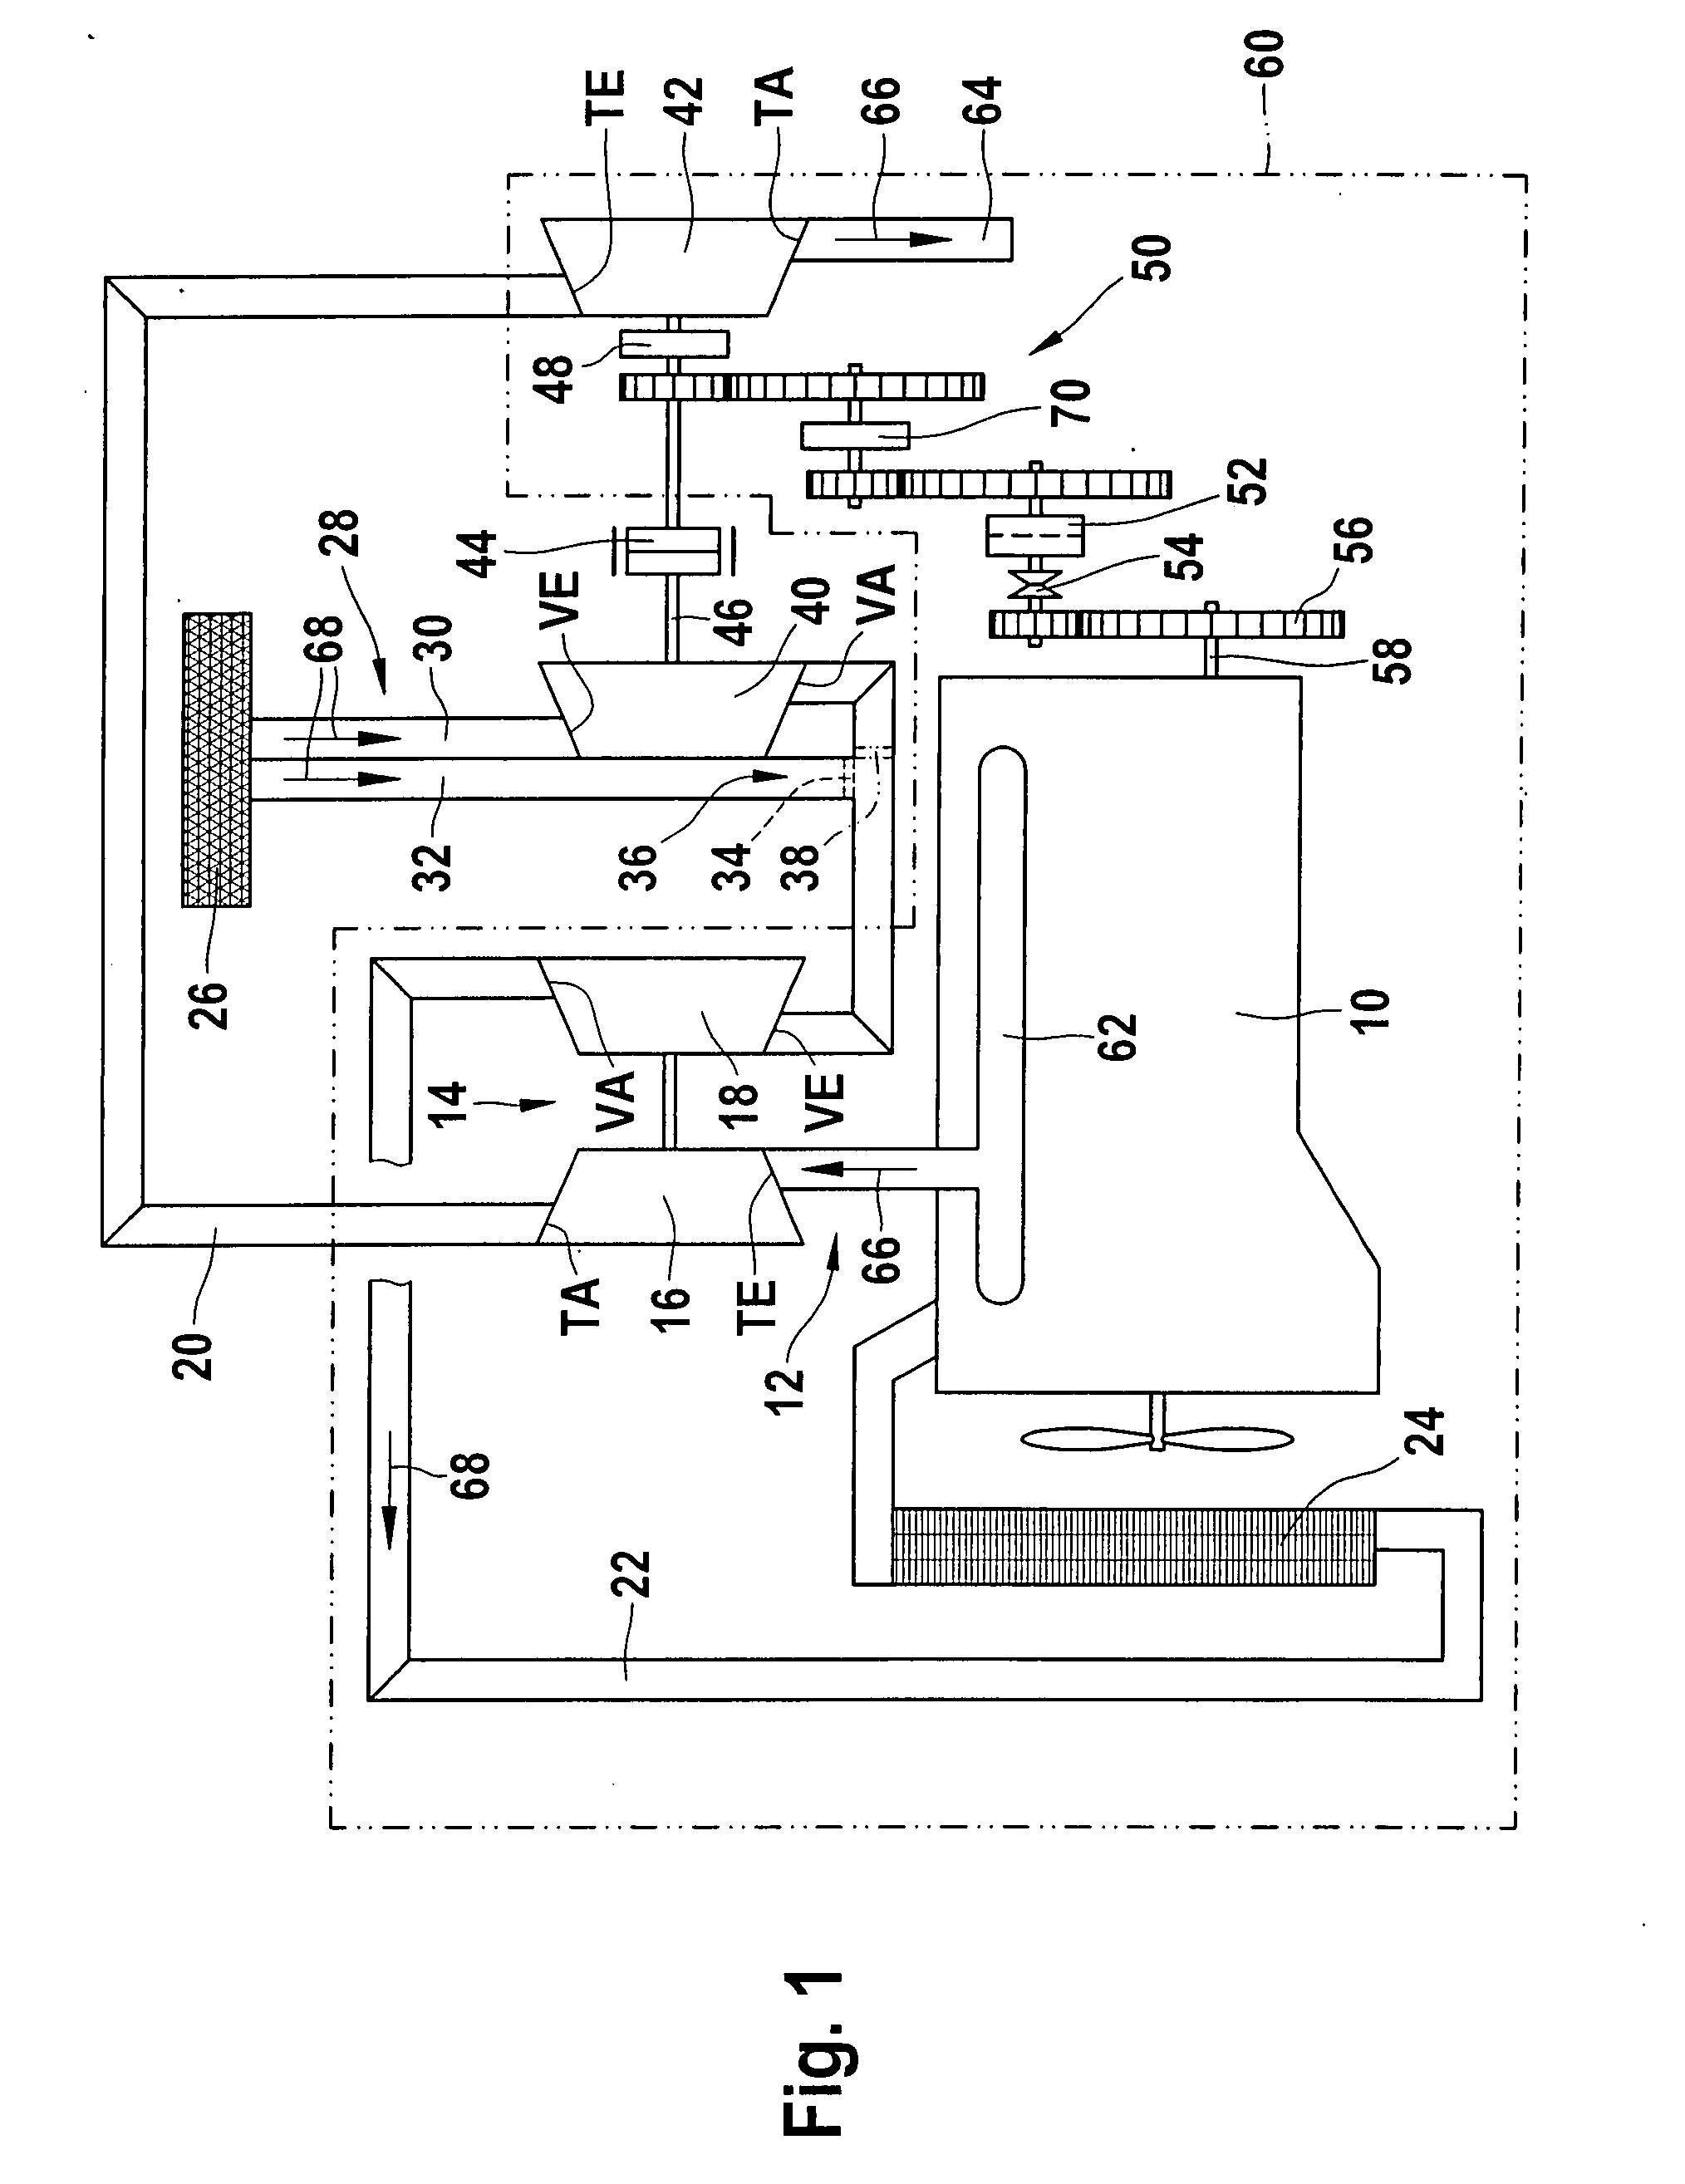 Compound Turbocharger System Having a Connectable Compressor